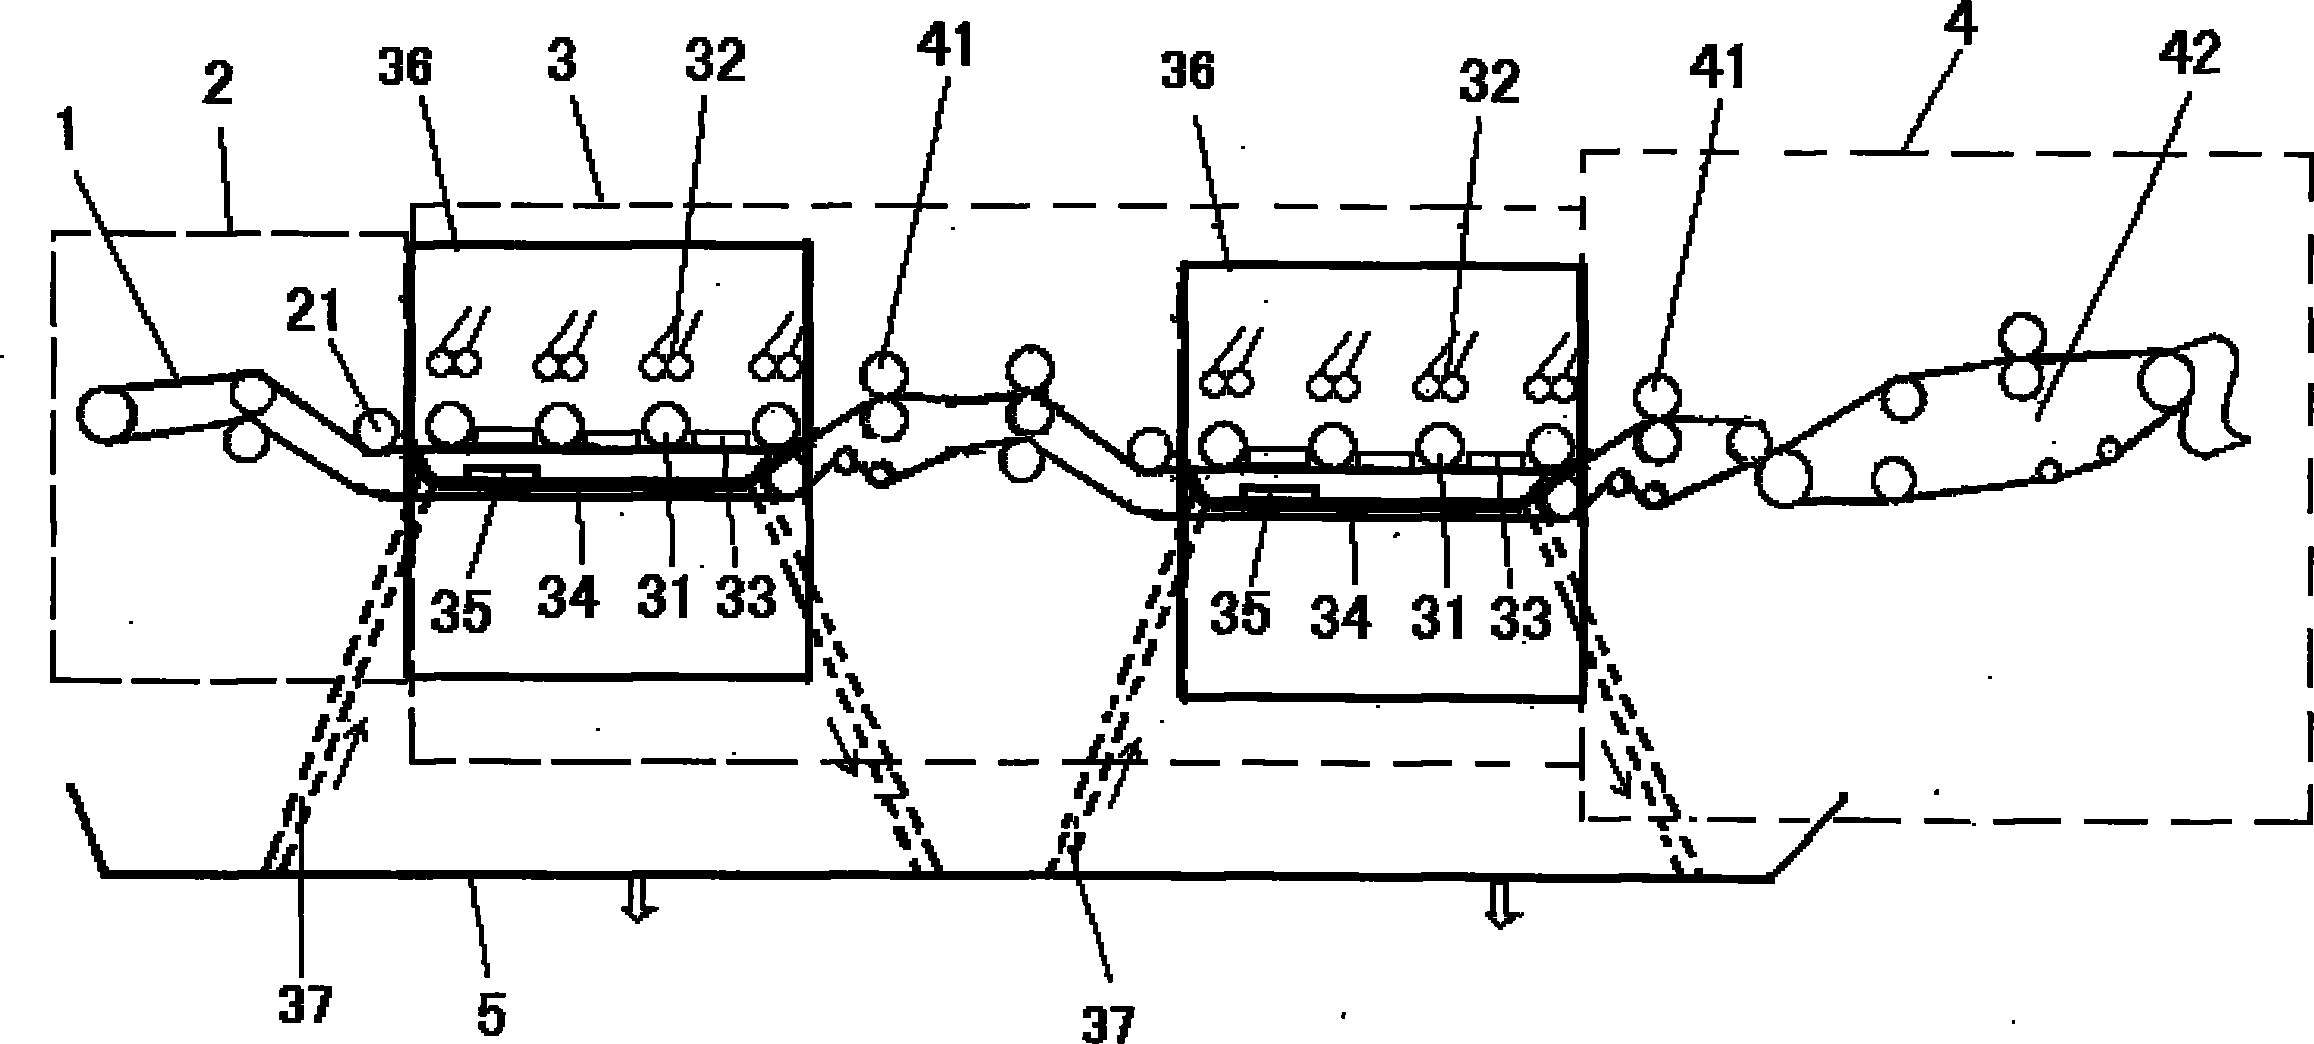 Method and device for rinsing and softening fiber bundles